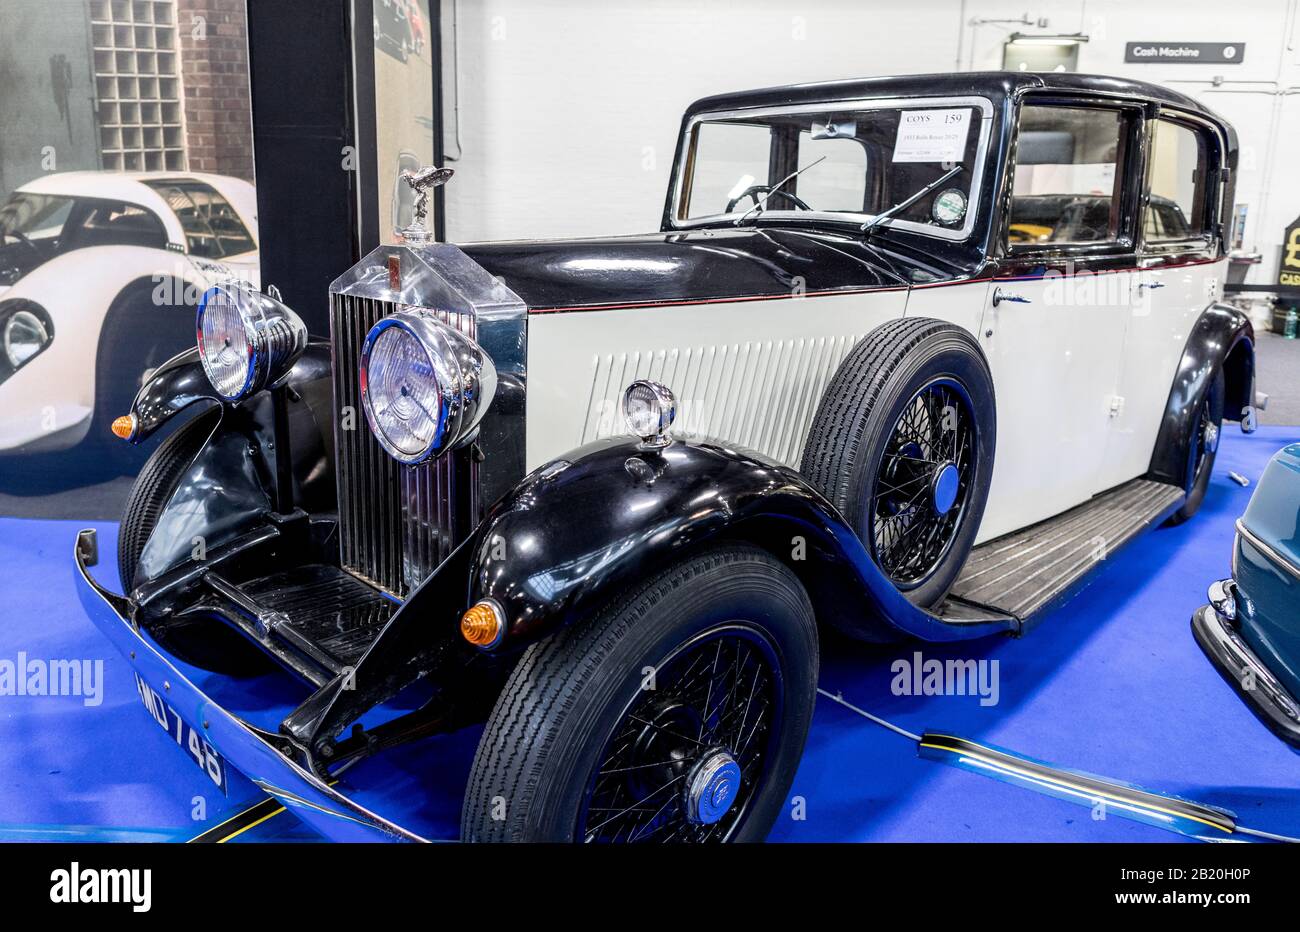 A 1933 Rolls Royce 20/25 At The Classic Car Show London 2020 Stock Photo